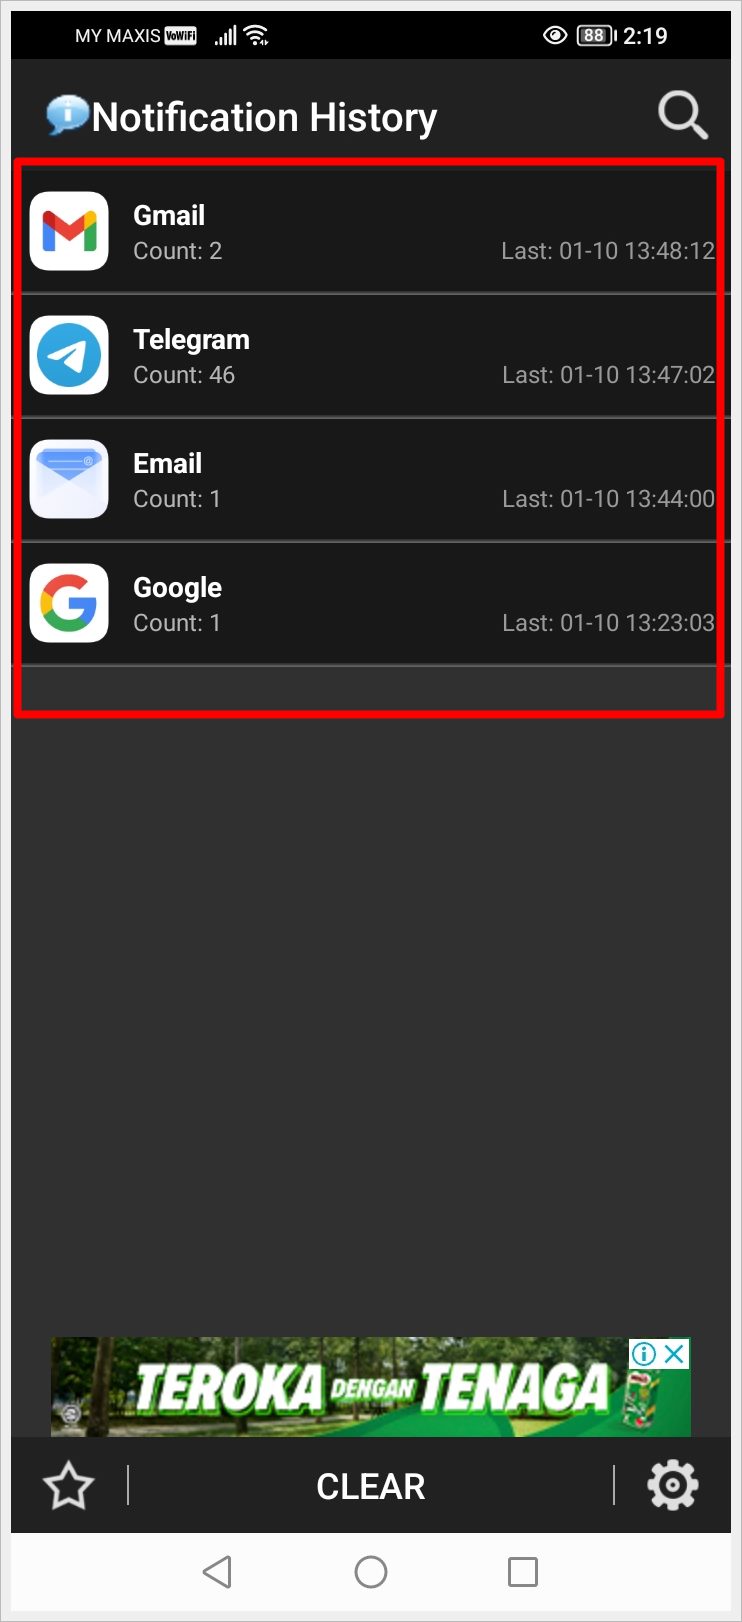 This image shows a screenshot of the 'Notification History' app on an Android phone, displaying a list of recent notifications received.